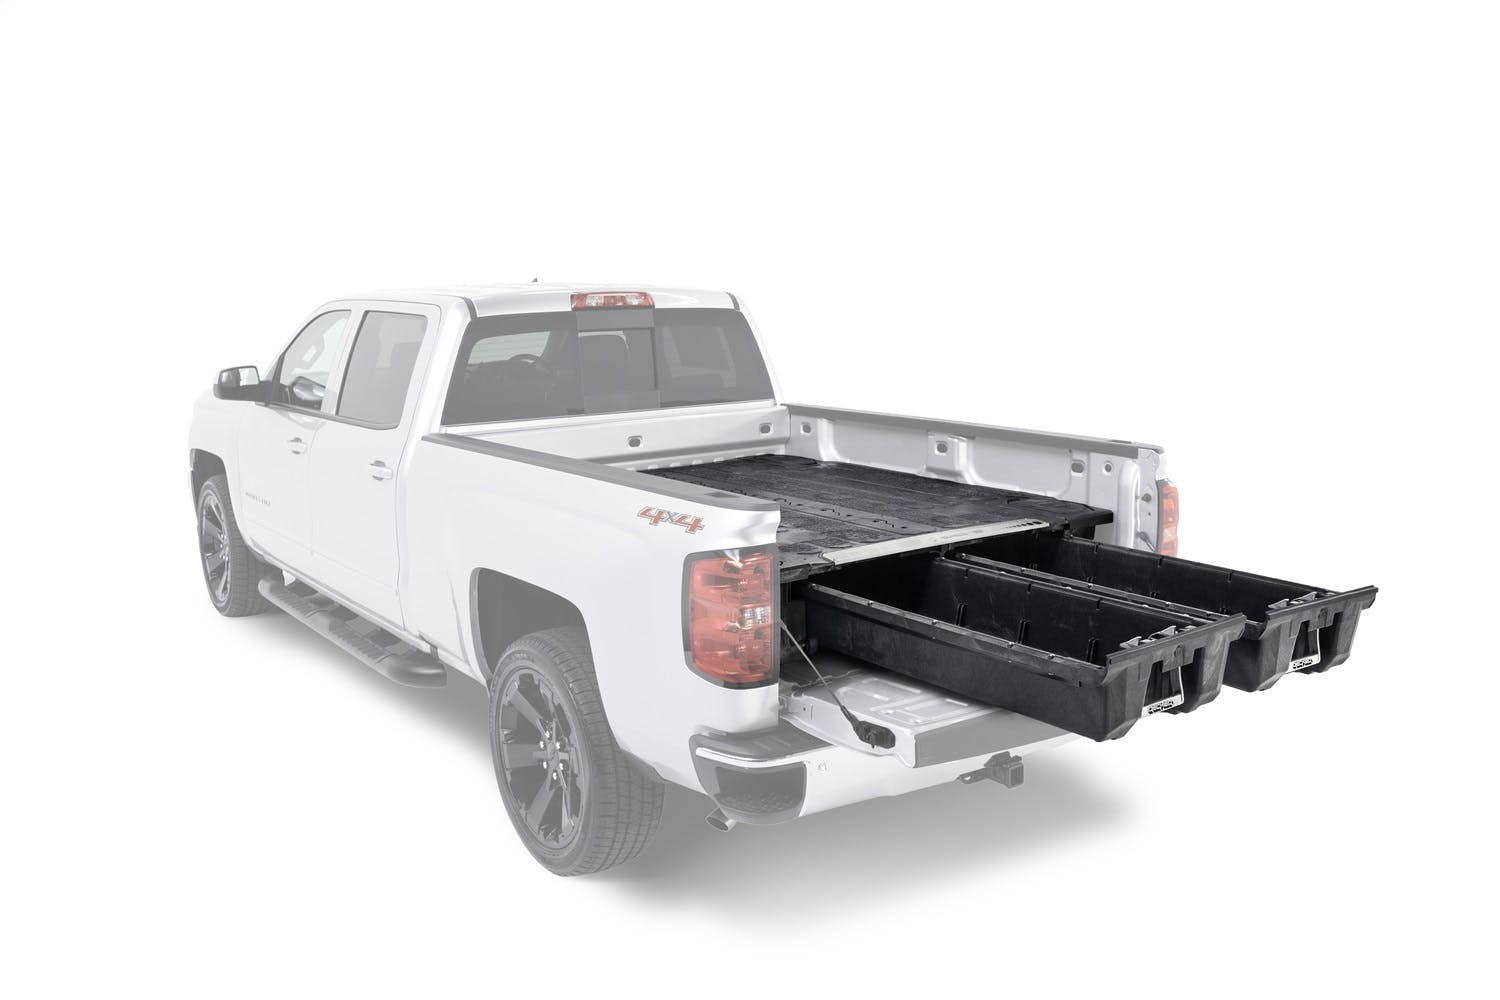 DECKED DF2 64.54 Two Drawer Storage System for A Full Size Pick Up Truck